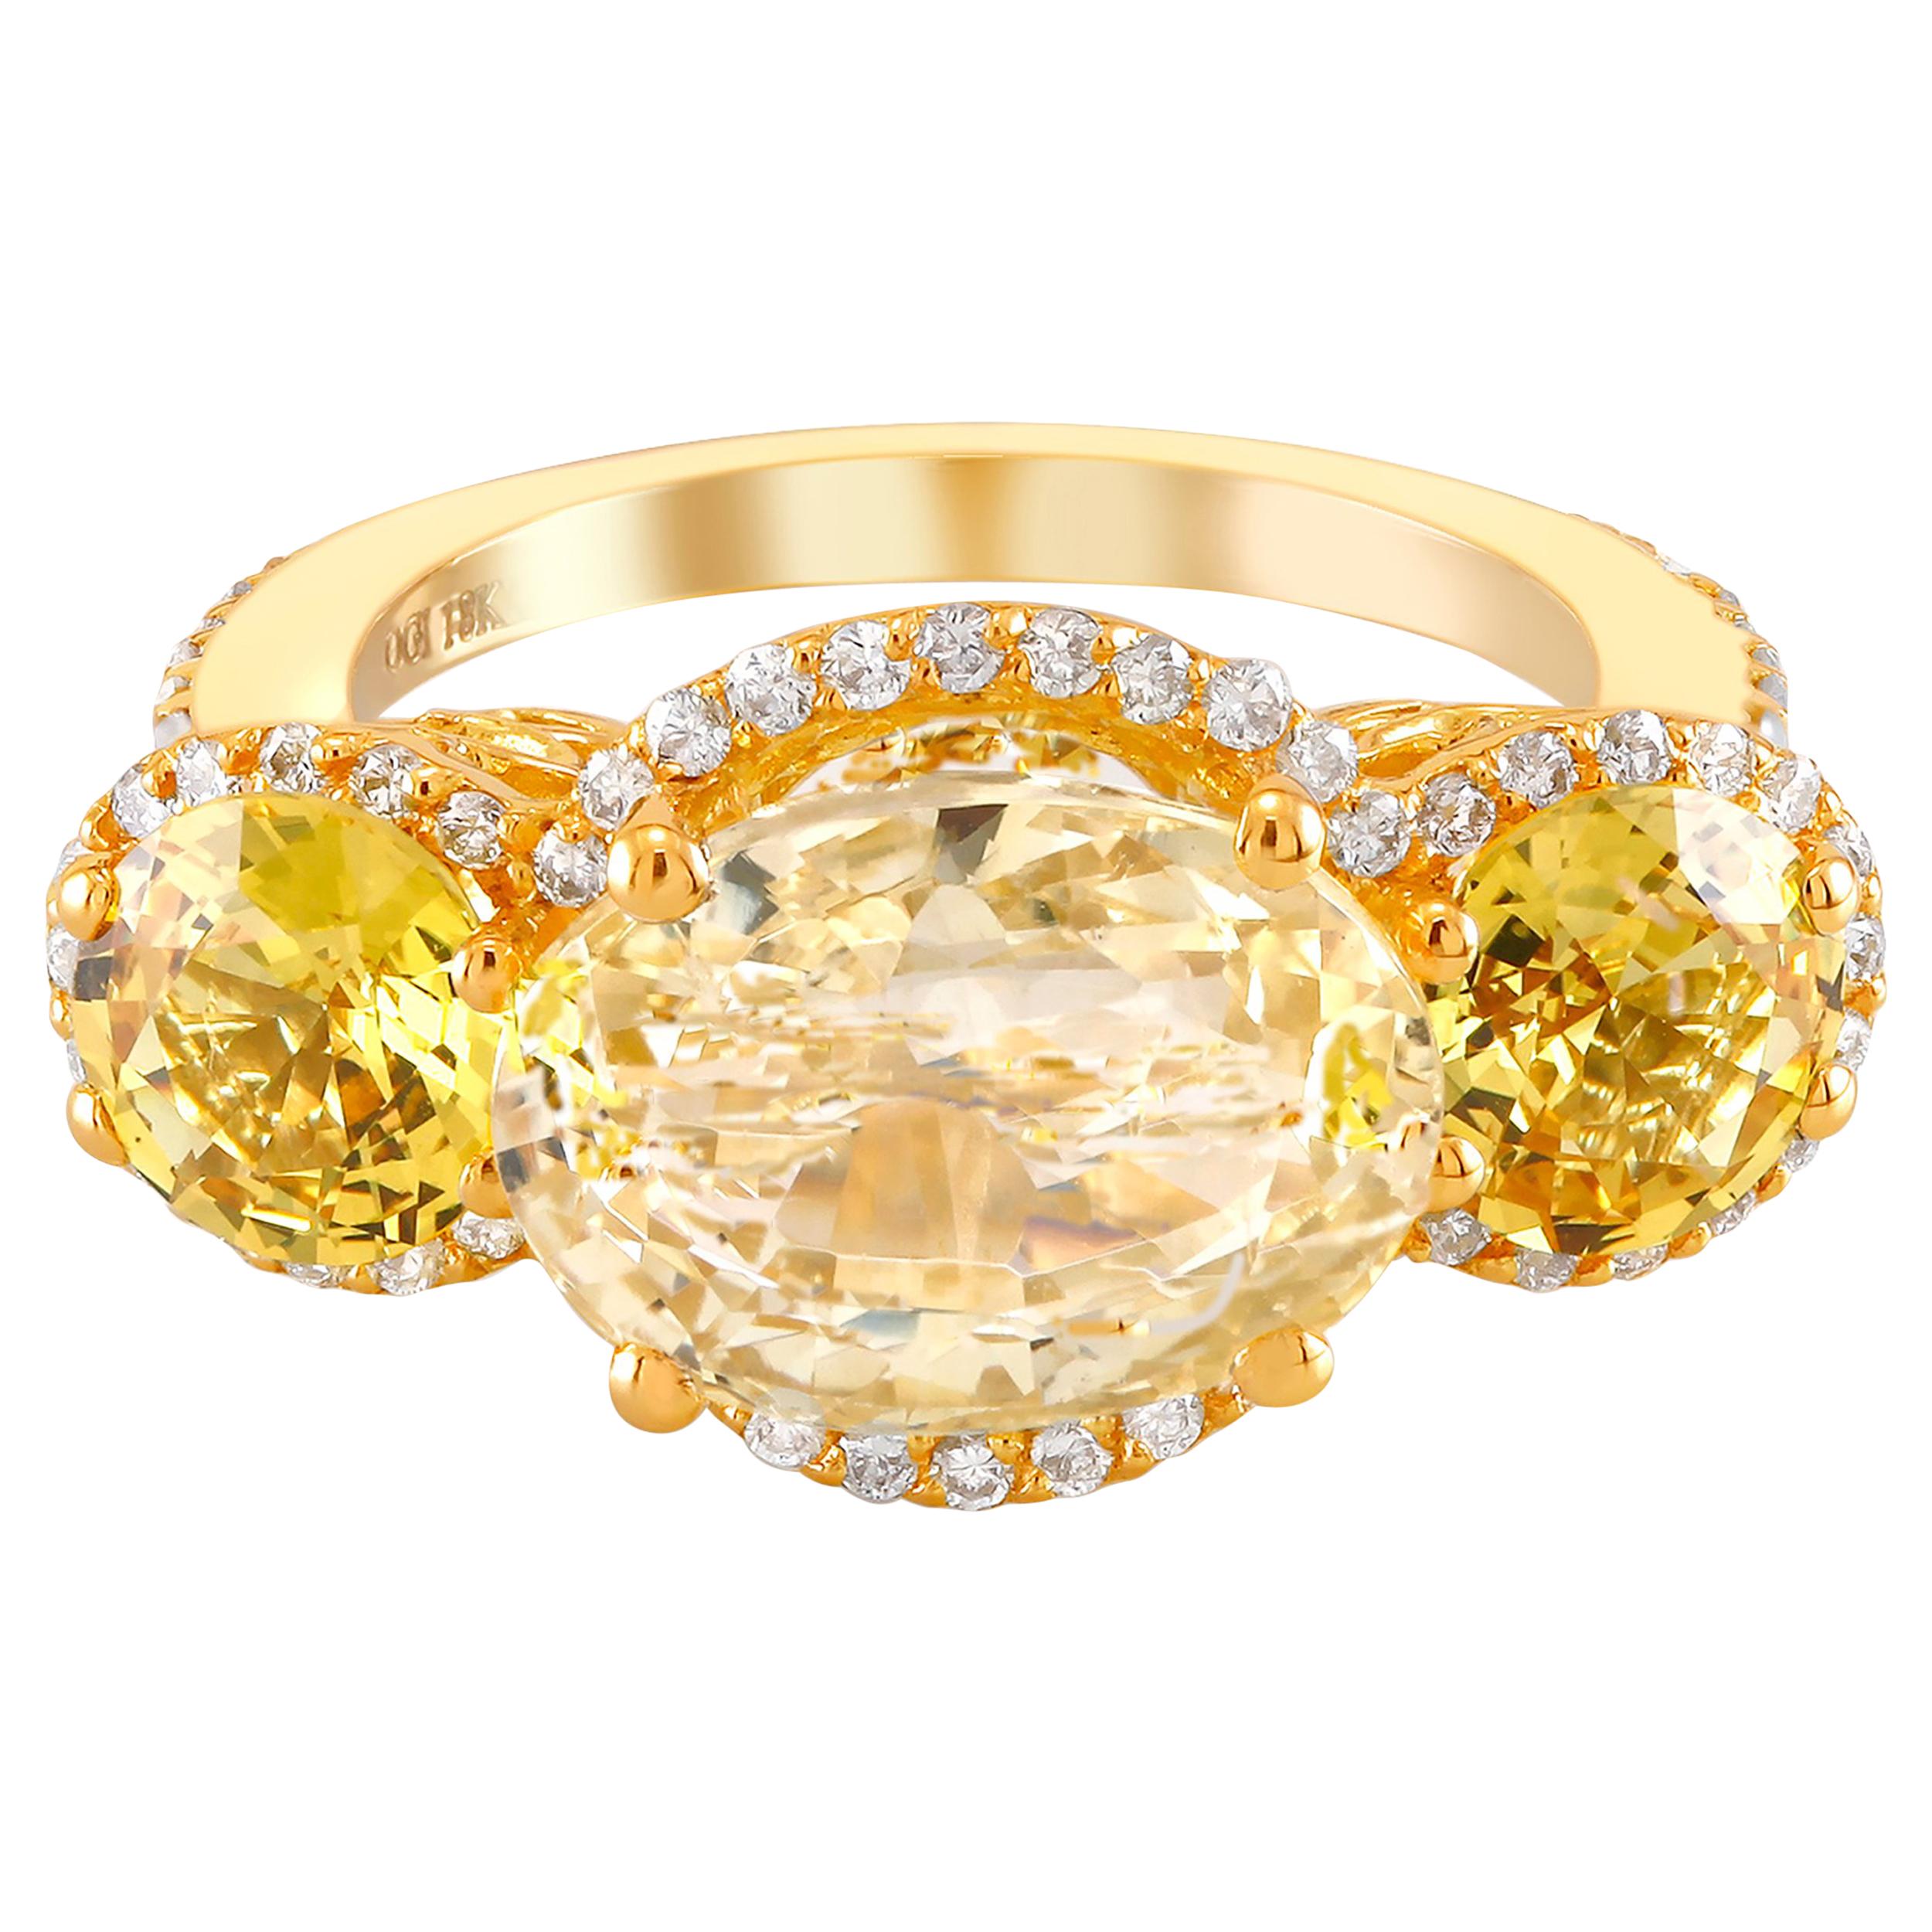 One of a Kind 18k yellow gold cocktail ring 
Yellow Sapphire weighing 5.72 carats 
GIA Yellow Sapphire no indication of heating
Geographic Origin Sri Lanka
GIA Certificate #2195471074
Matched pair of round yellow sapphire Sapphire weighing 2.06